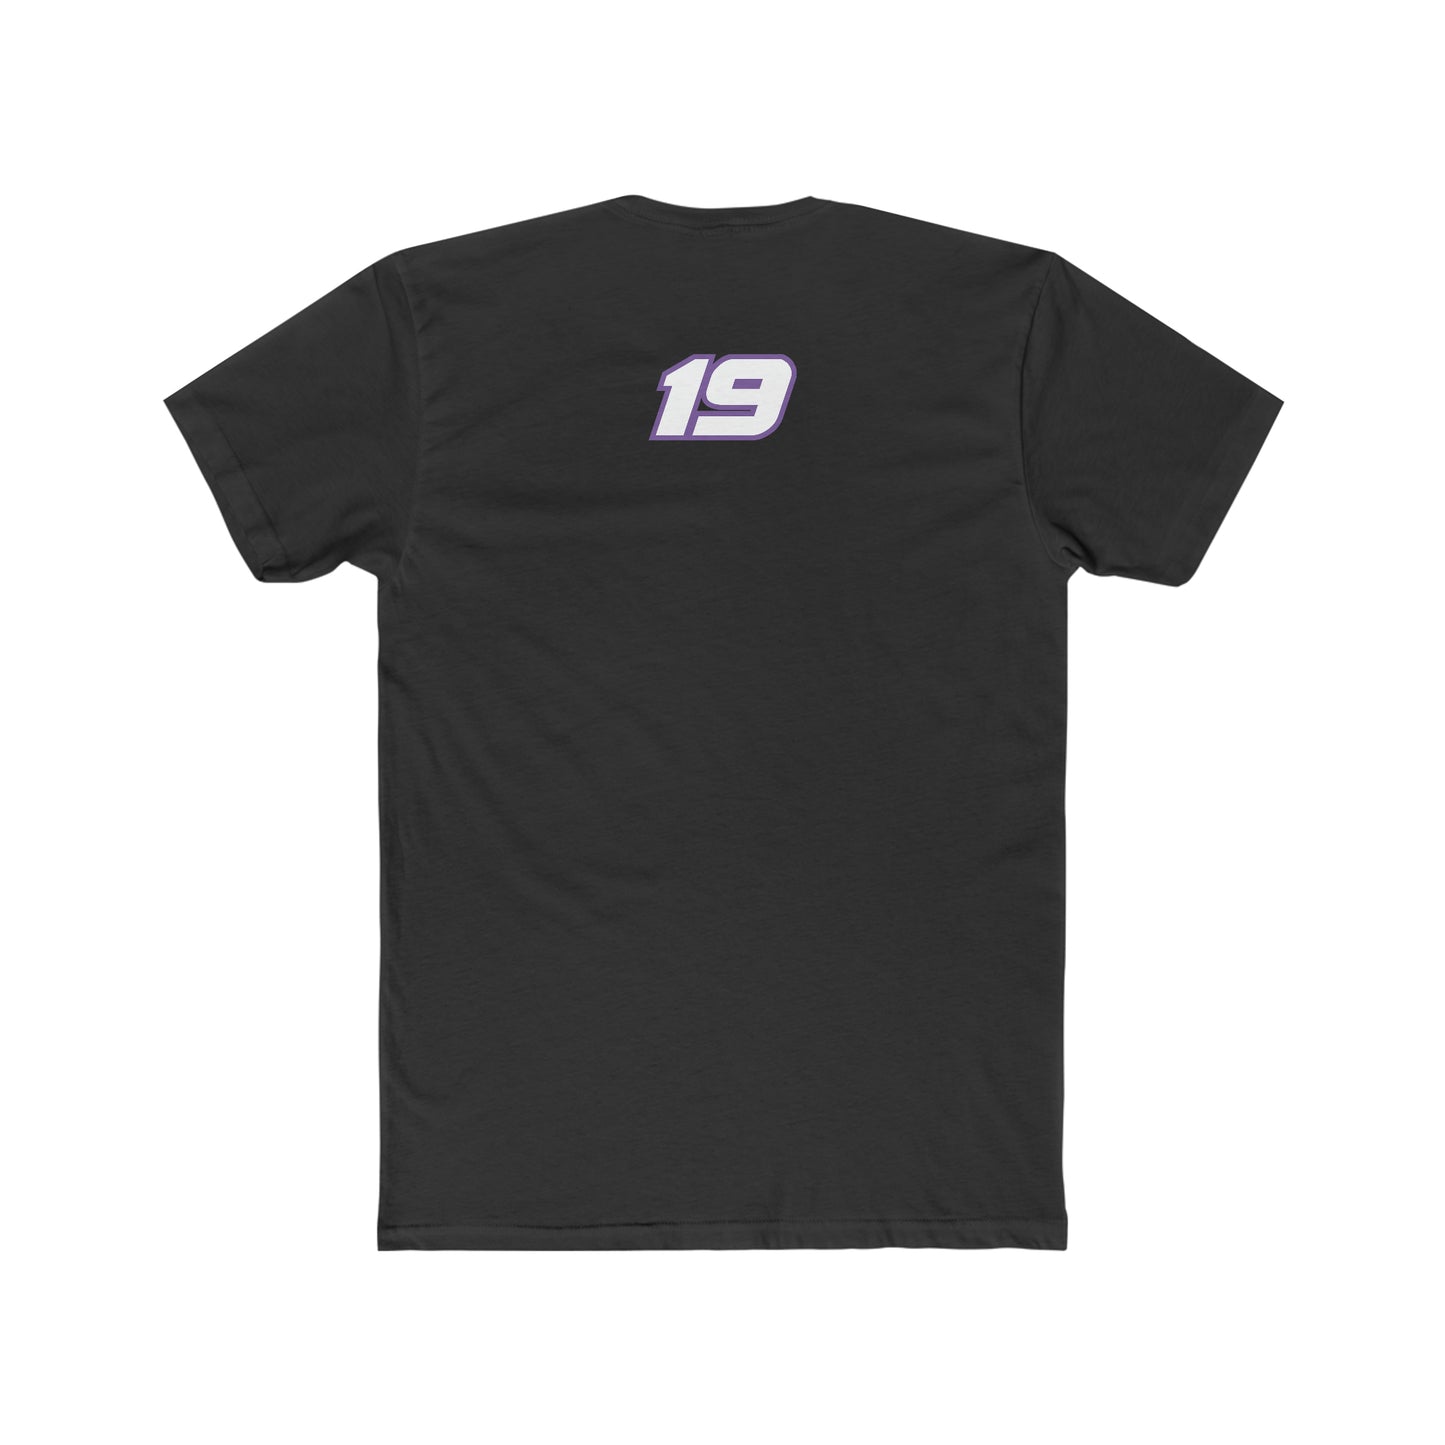 Curt Vincent Racing Race Day Tee